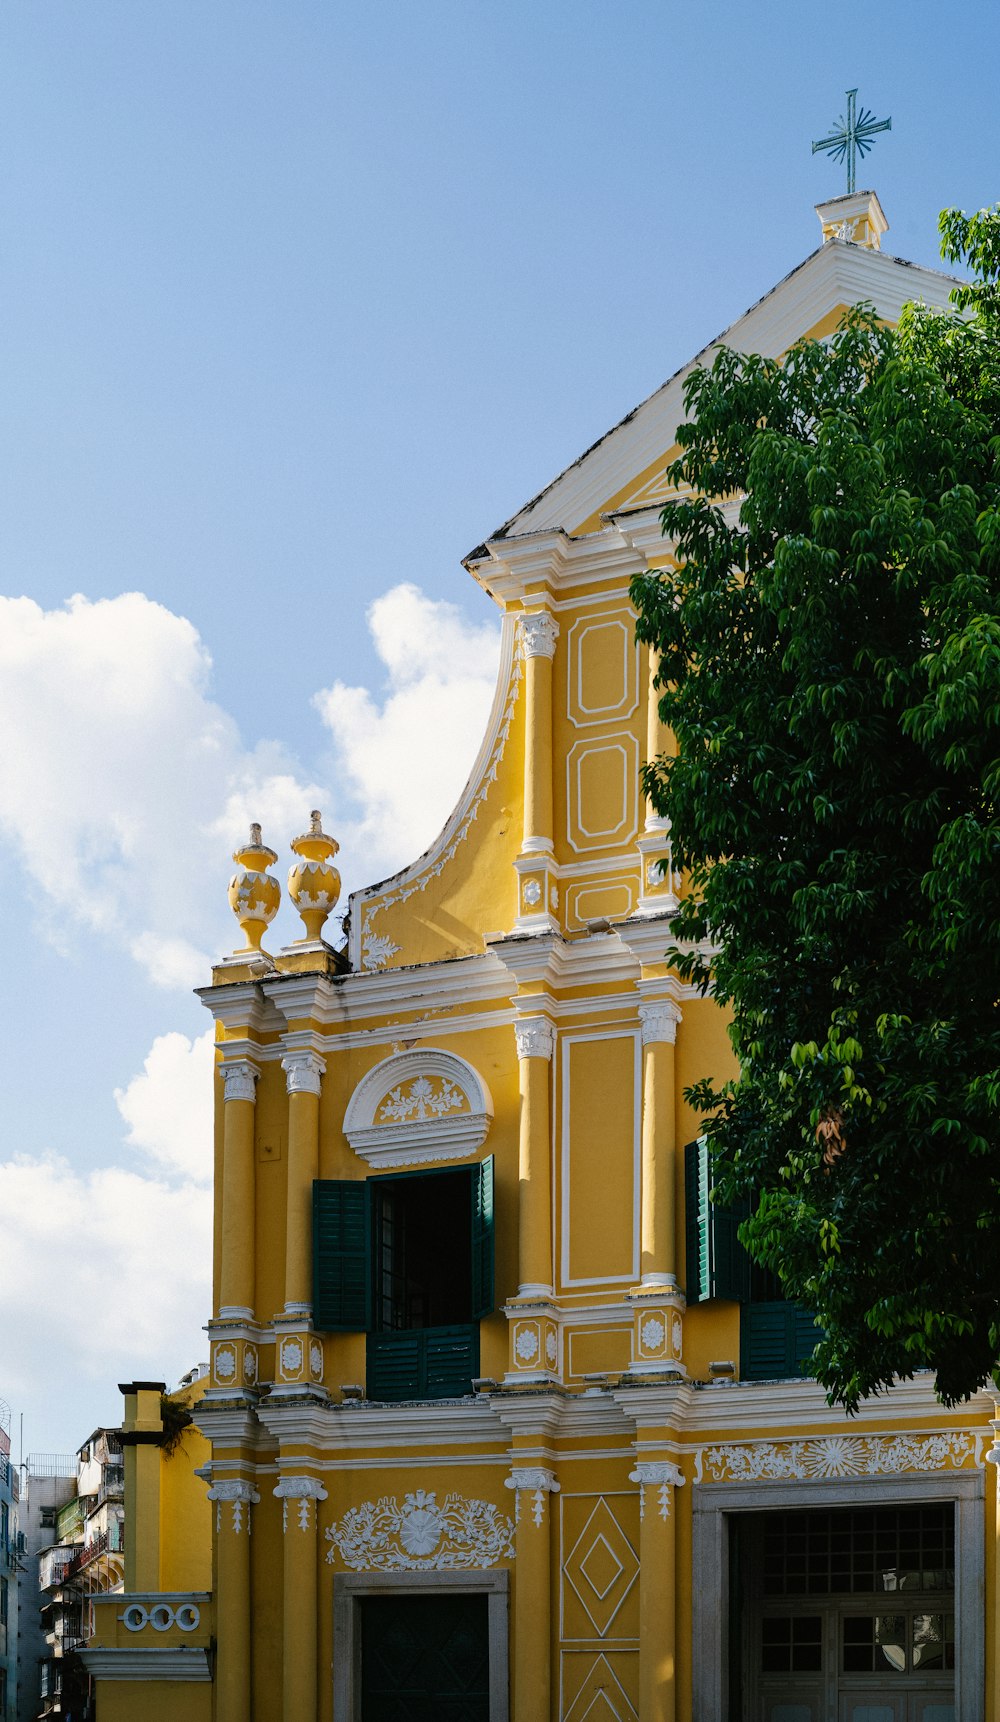 a yellow building with green shutters and a cross on top